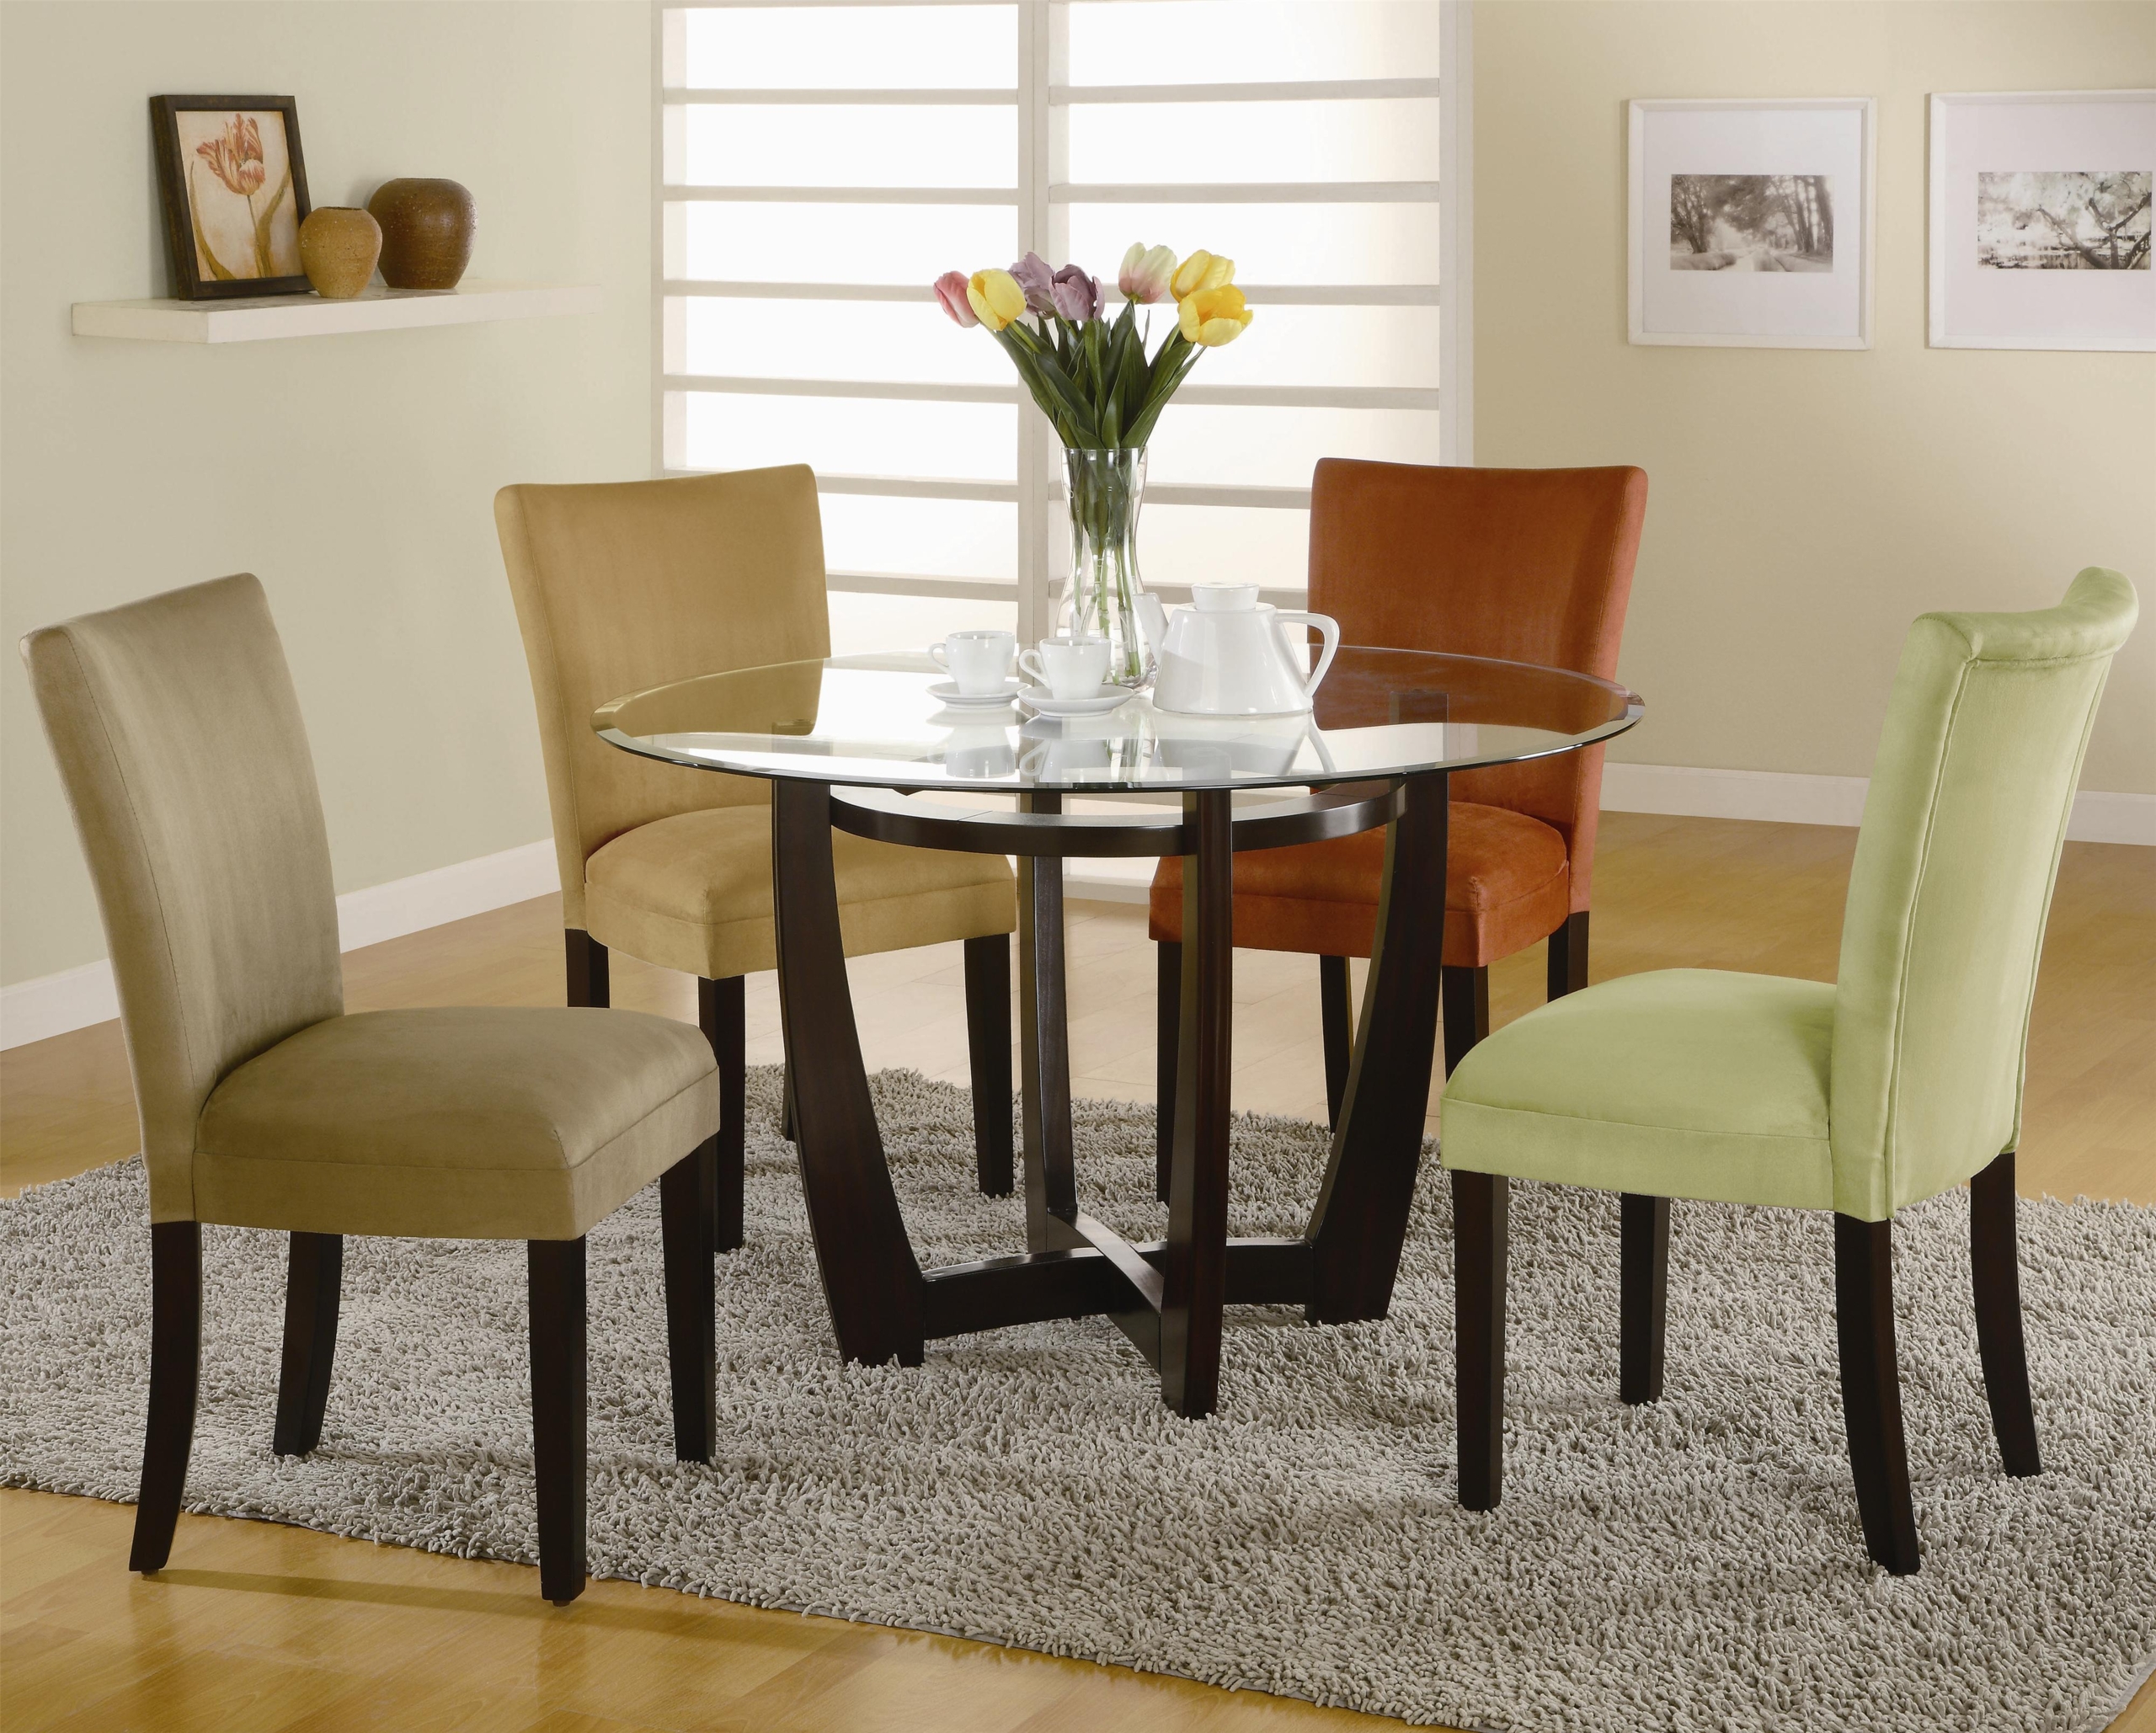 Pier one dining room sets